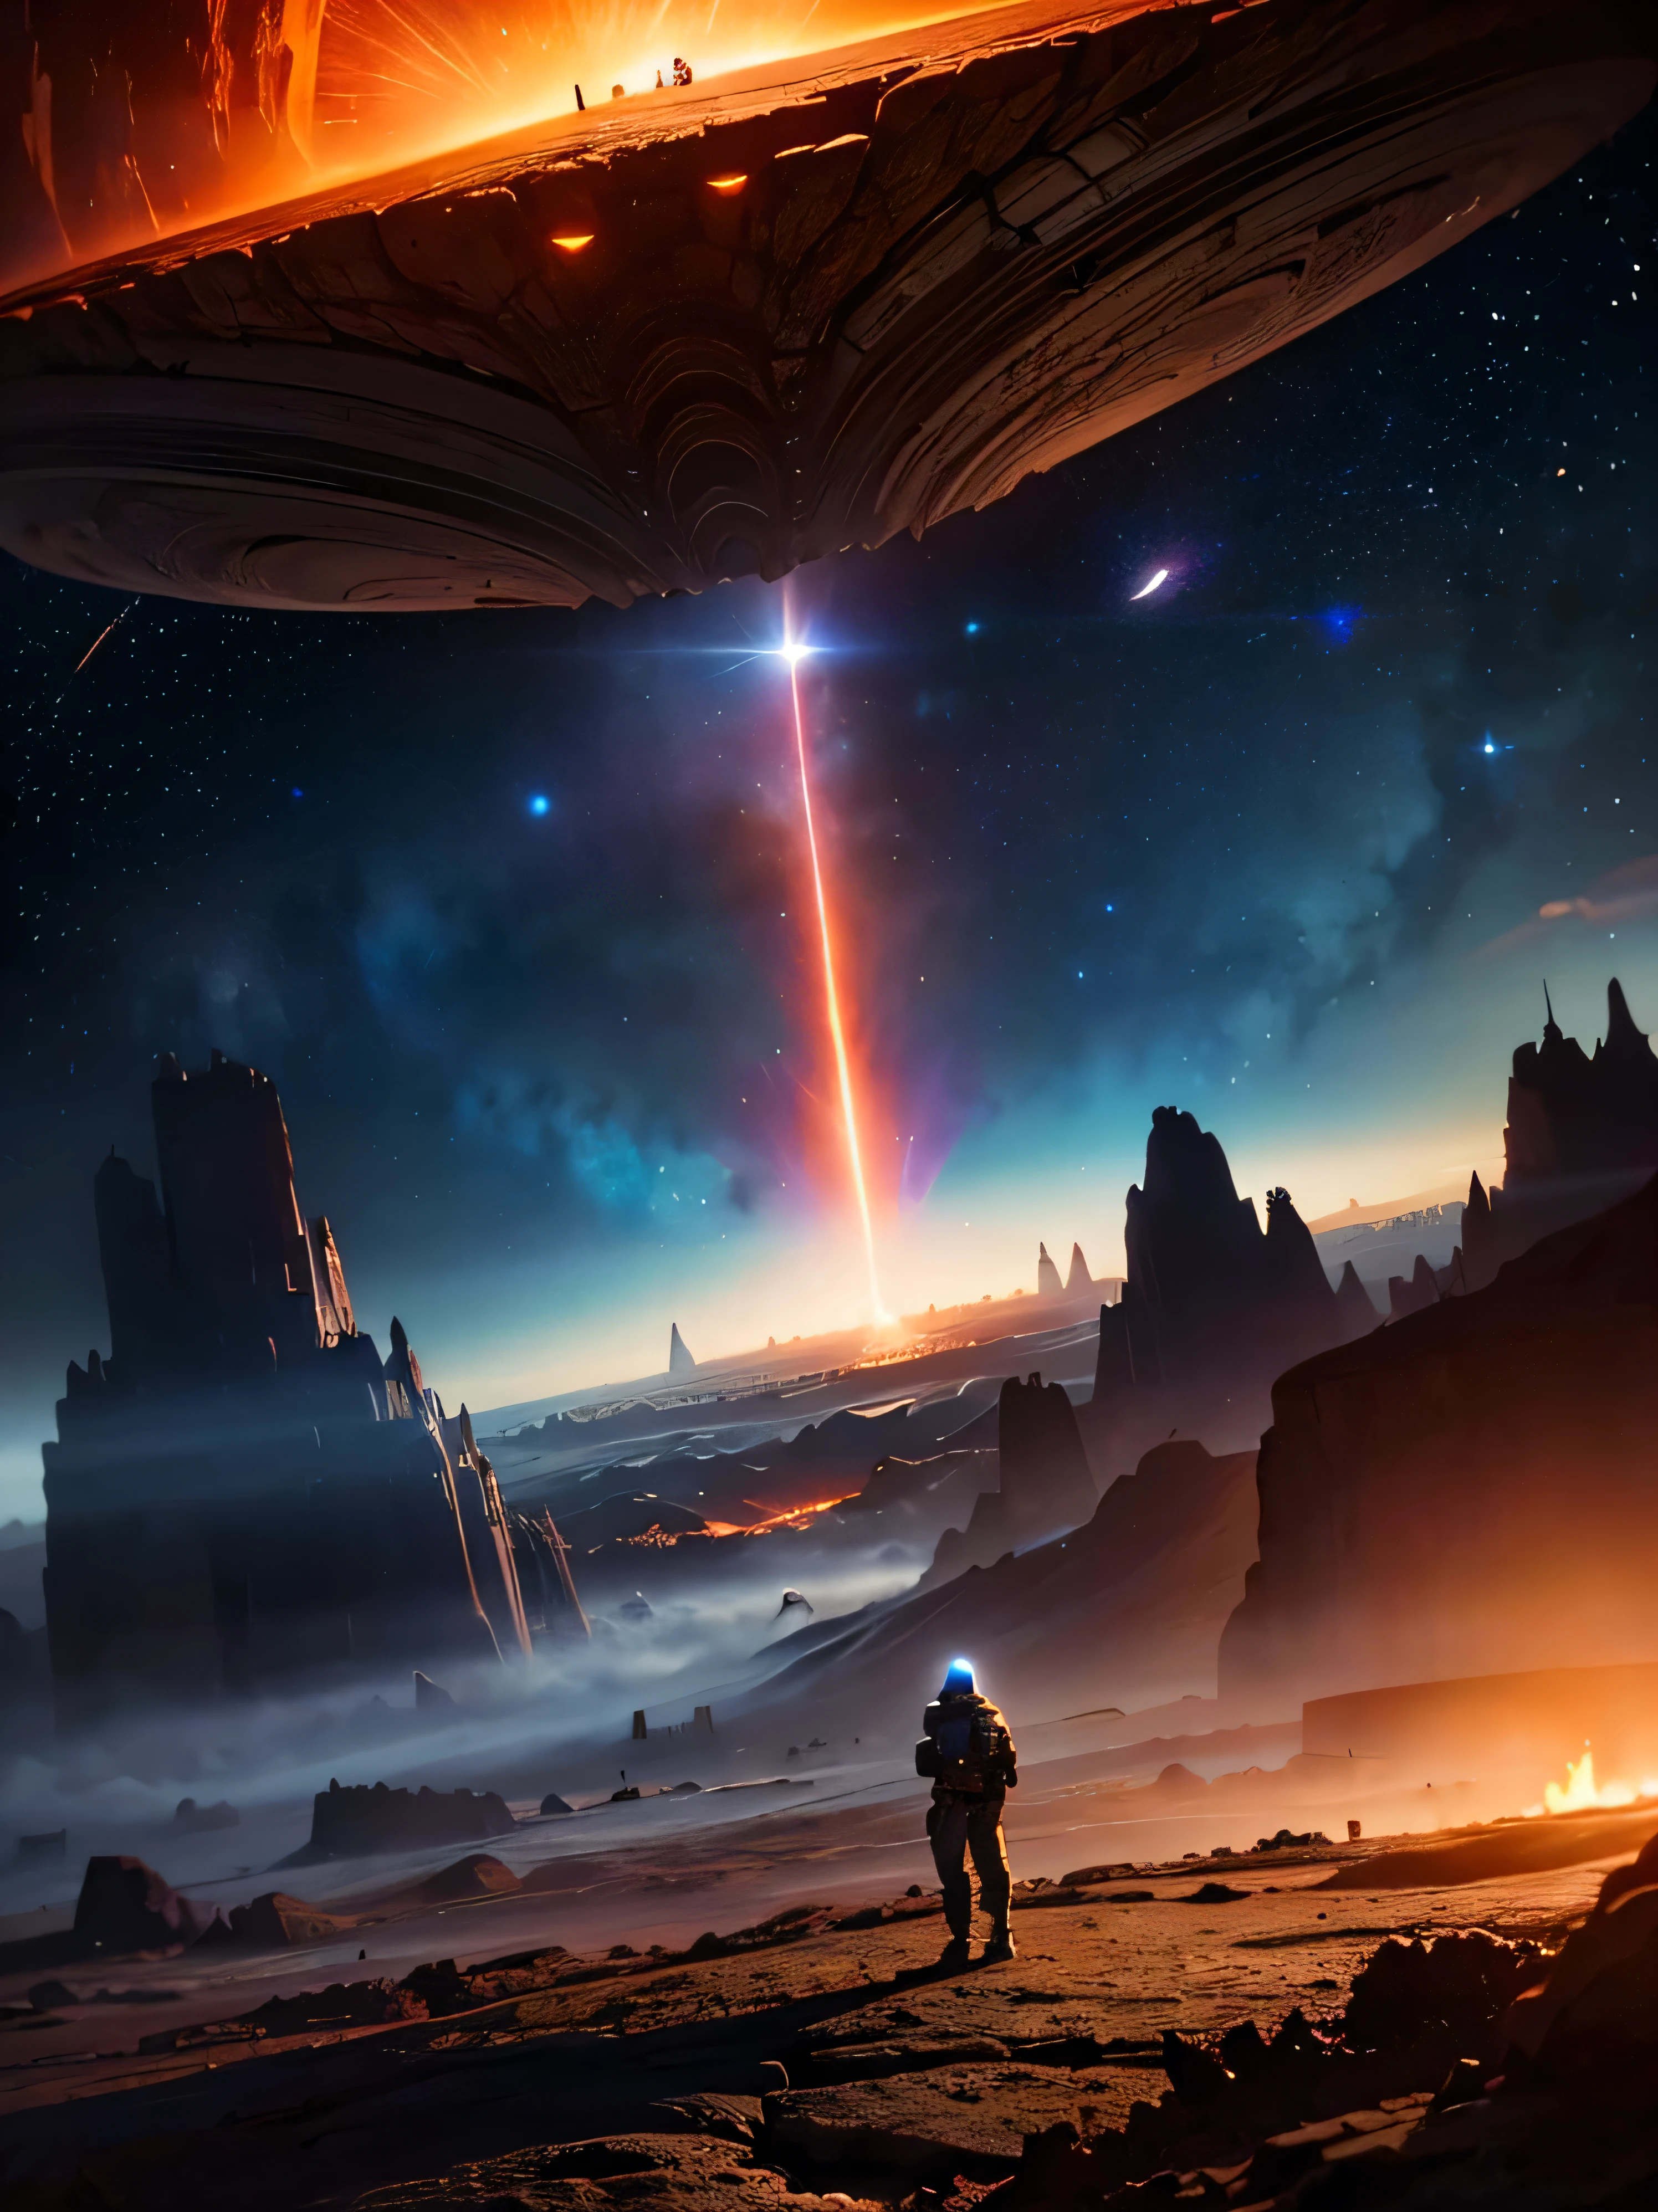 a man in a space suit standing on a cybernetic earth with a red light inside, scientific earth crust, the earth sprouts lava, earth covers lightly, whole earth, the earth, hollow earth, earth outside, vtm, the planet is warm with canyons, earthy, the planet, the stars and galaxy in the background, jessica rossier fantasy art, inspired by jessica rossier, jessica rossier color scheme, by jessica rossier, stunning alien landscape, cinematic beeple, bastien grivet, amazing alien landscape, beeple and tim hildebrandt, beeple and jean giraud, alien breathtaking landscape, apocolypse, end of the world
